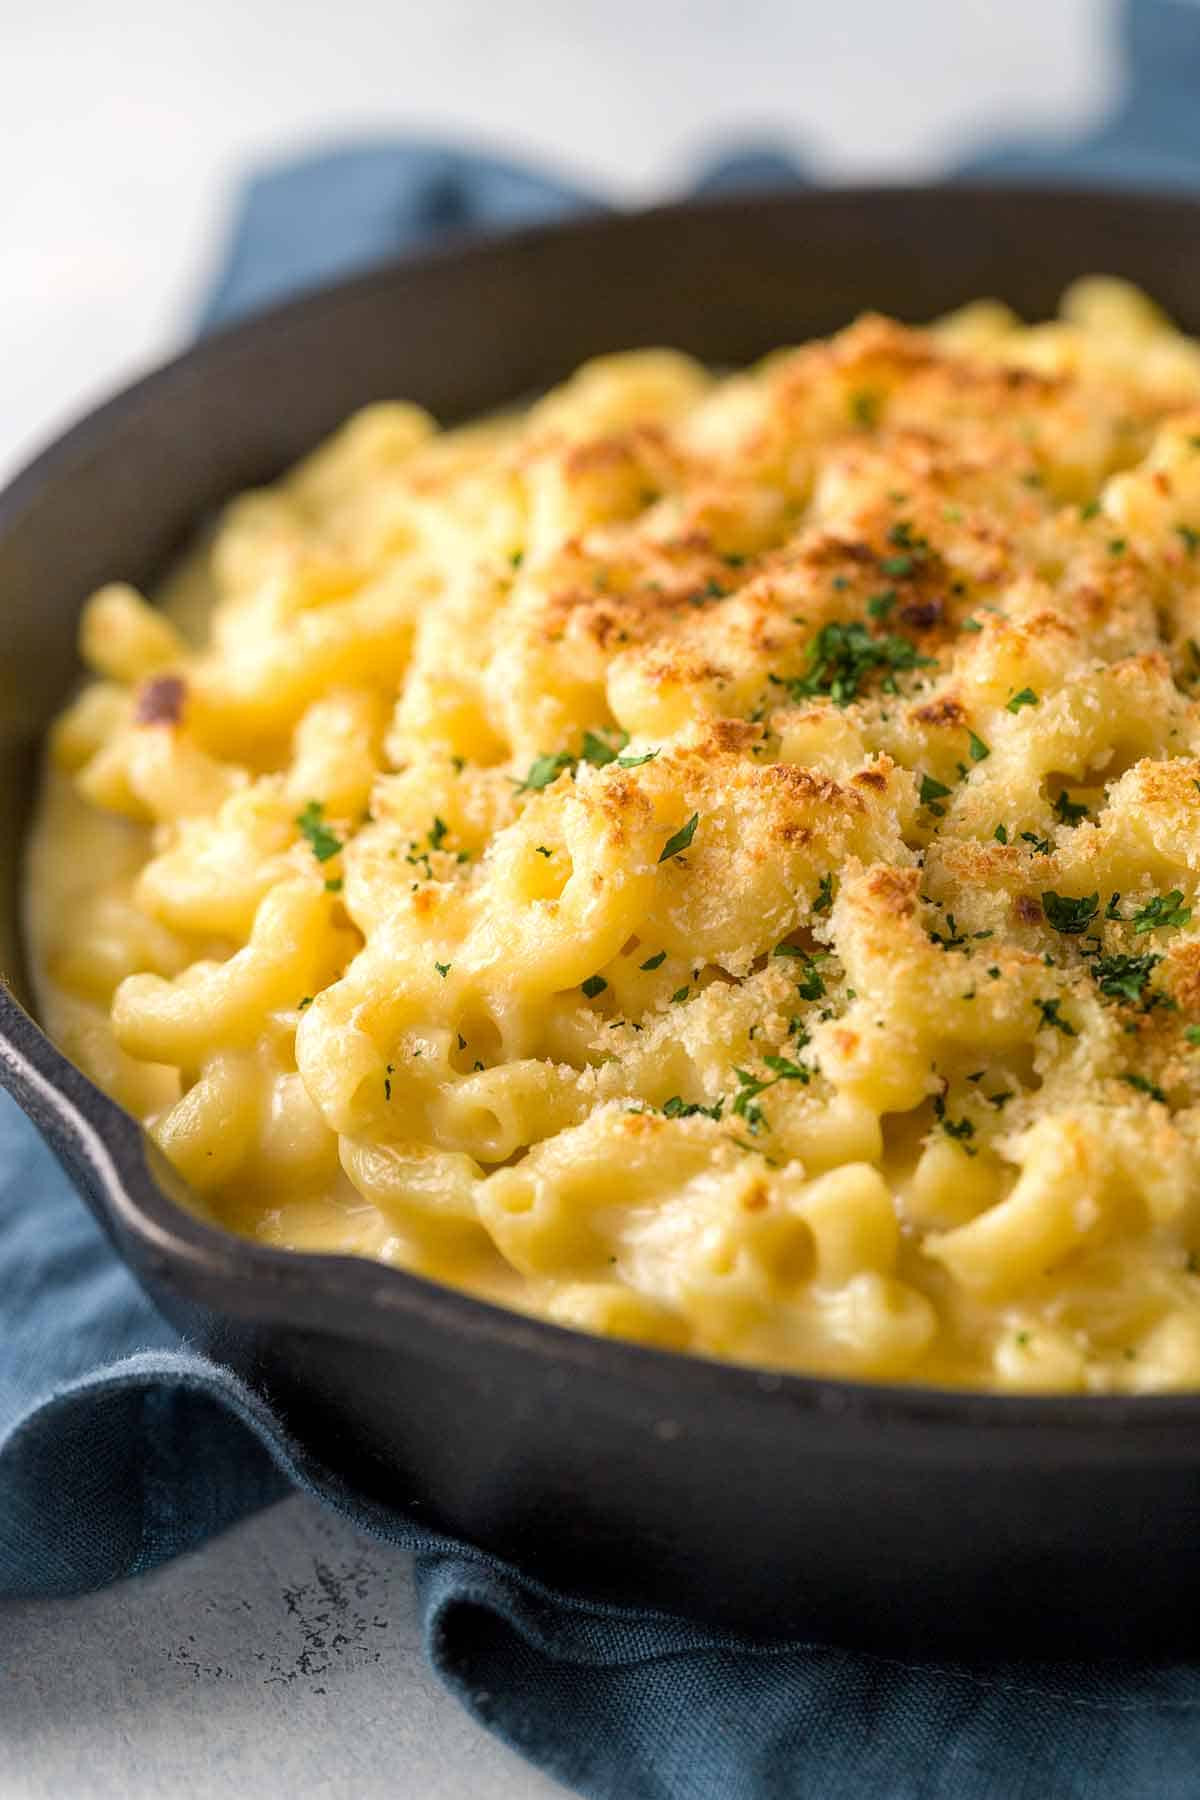 Simple Baked Macaroni And Cheese Recipe
 Baked Macaroni and Cheese with Bread Crumb Topping